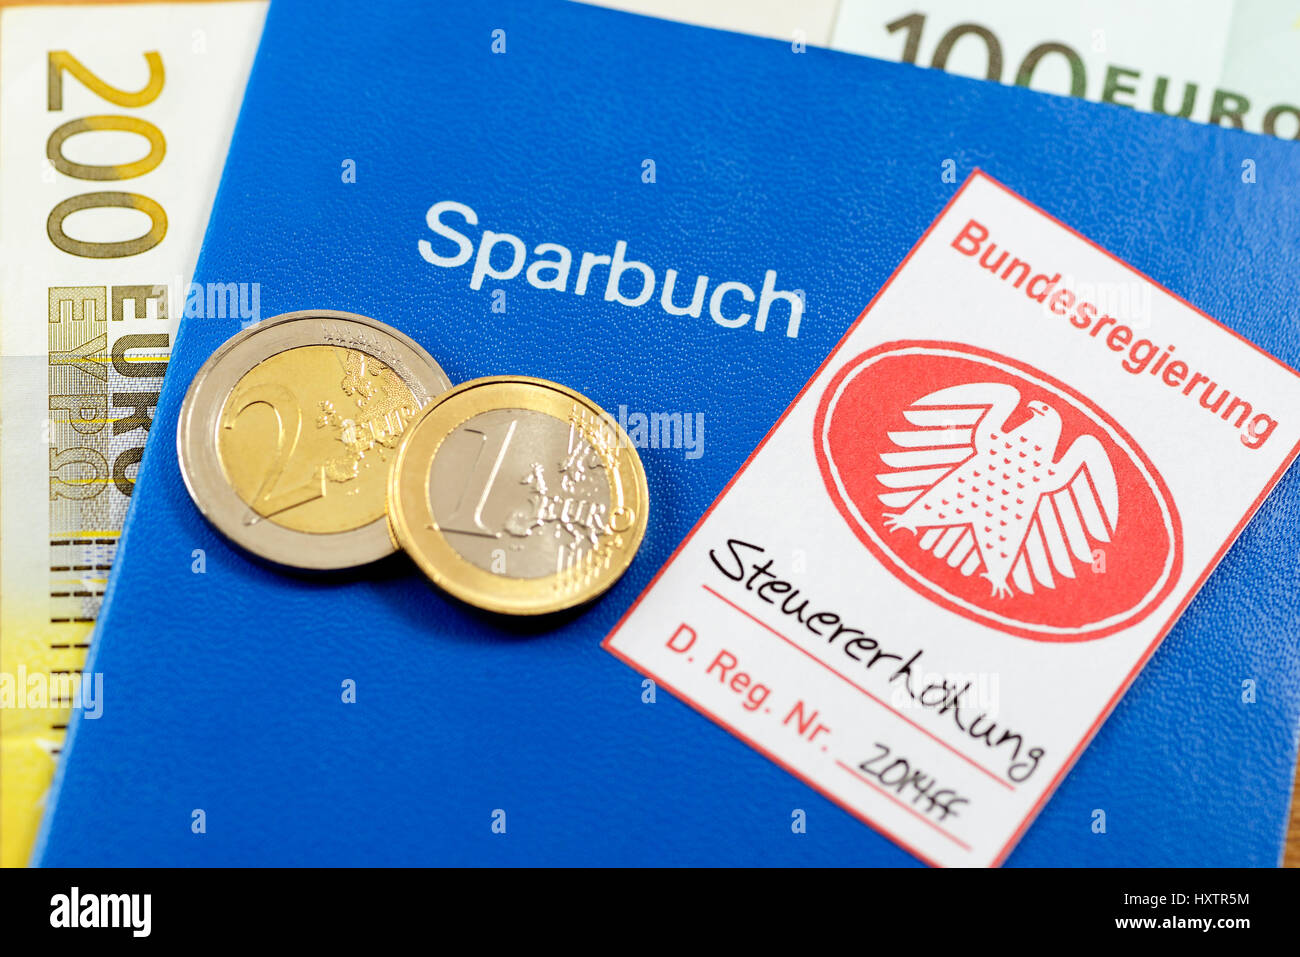 Security seal with federal eagle on savings book, symbolic photo tax rise, Pfandsiegel mit Bundesadler auf Sparbuch, Symbolfoto Steuererhöhung Stock Photo